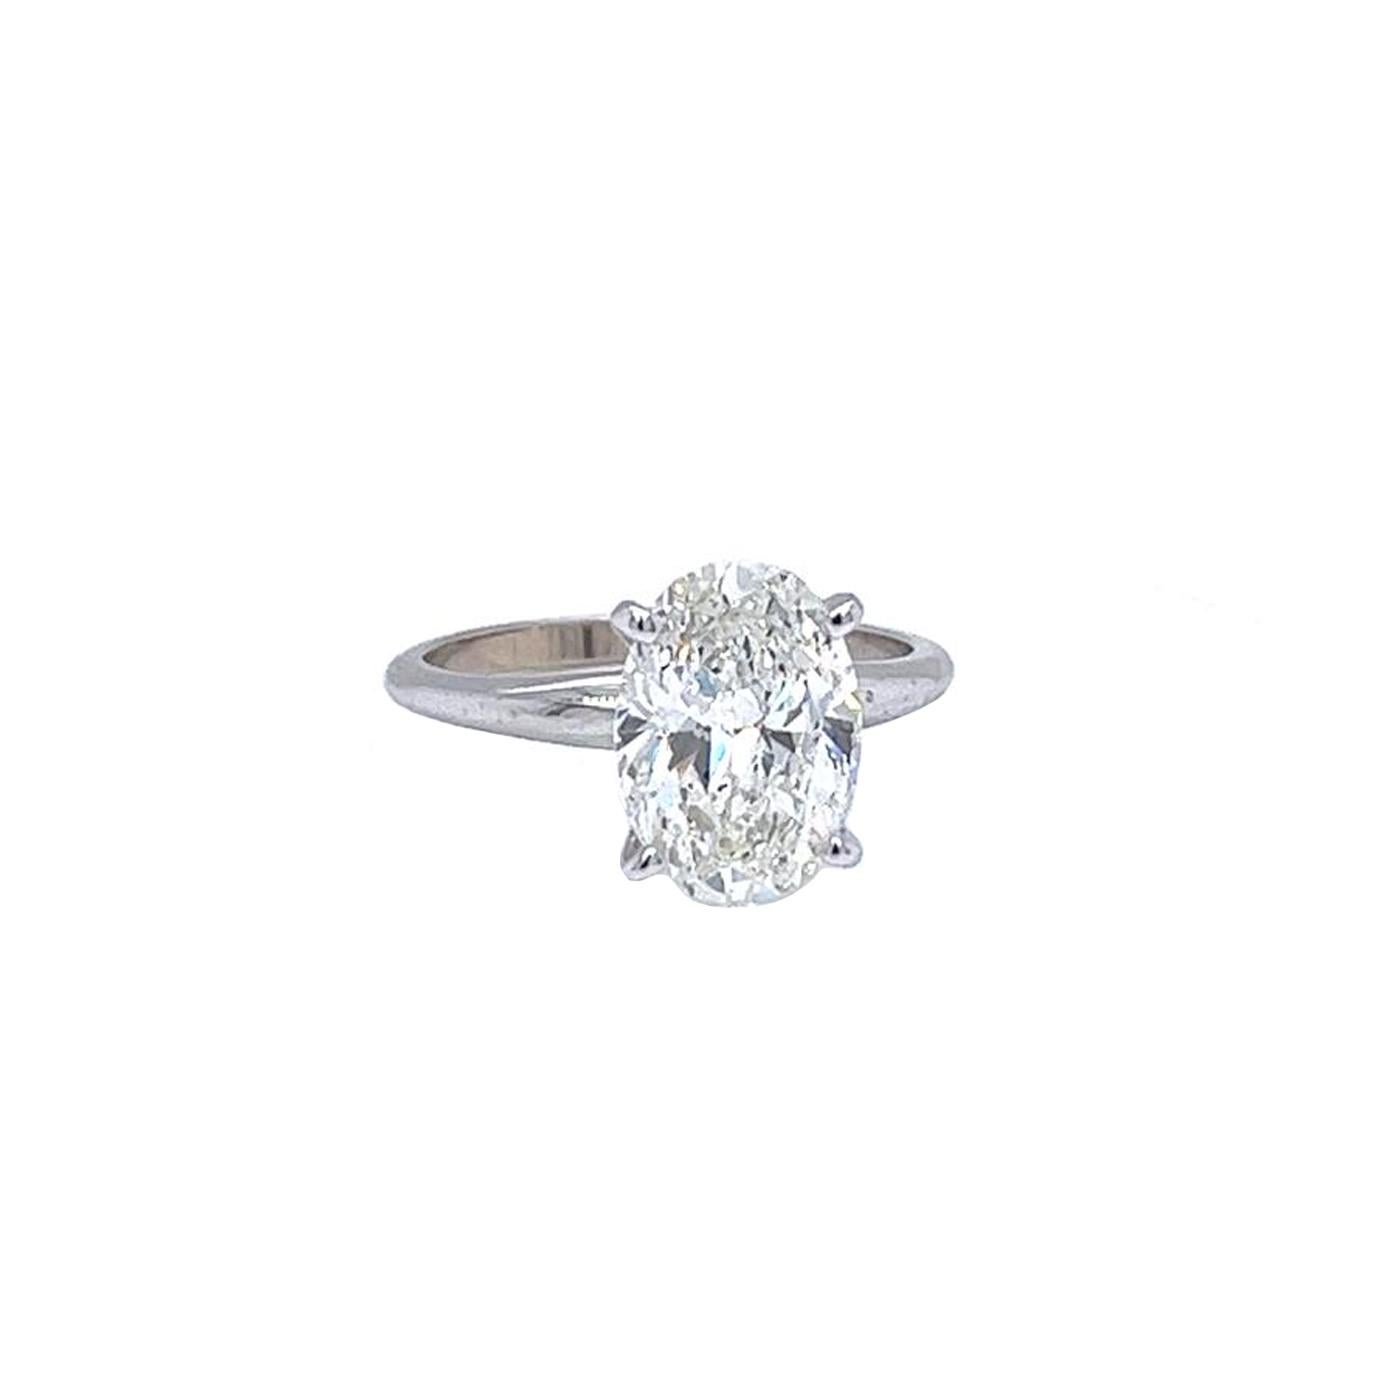 This beautiful ring features a 3.02-carat oval Brilliant Cut Diamond Tiffany Style in 14K Gold with dimensions of 11.42 x 8.22 x 4.68 mm. It has an Oval Brilliant cut with a Si1 clarity grade with I Color, GIA certified with Very Good polish, and